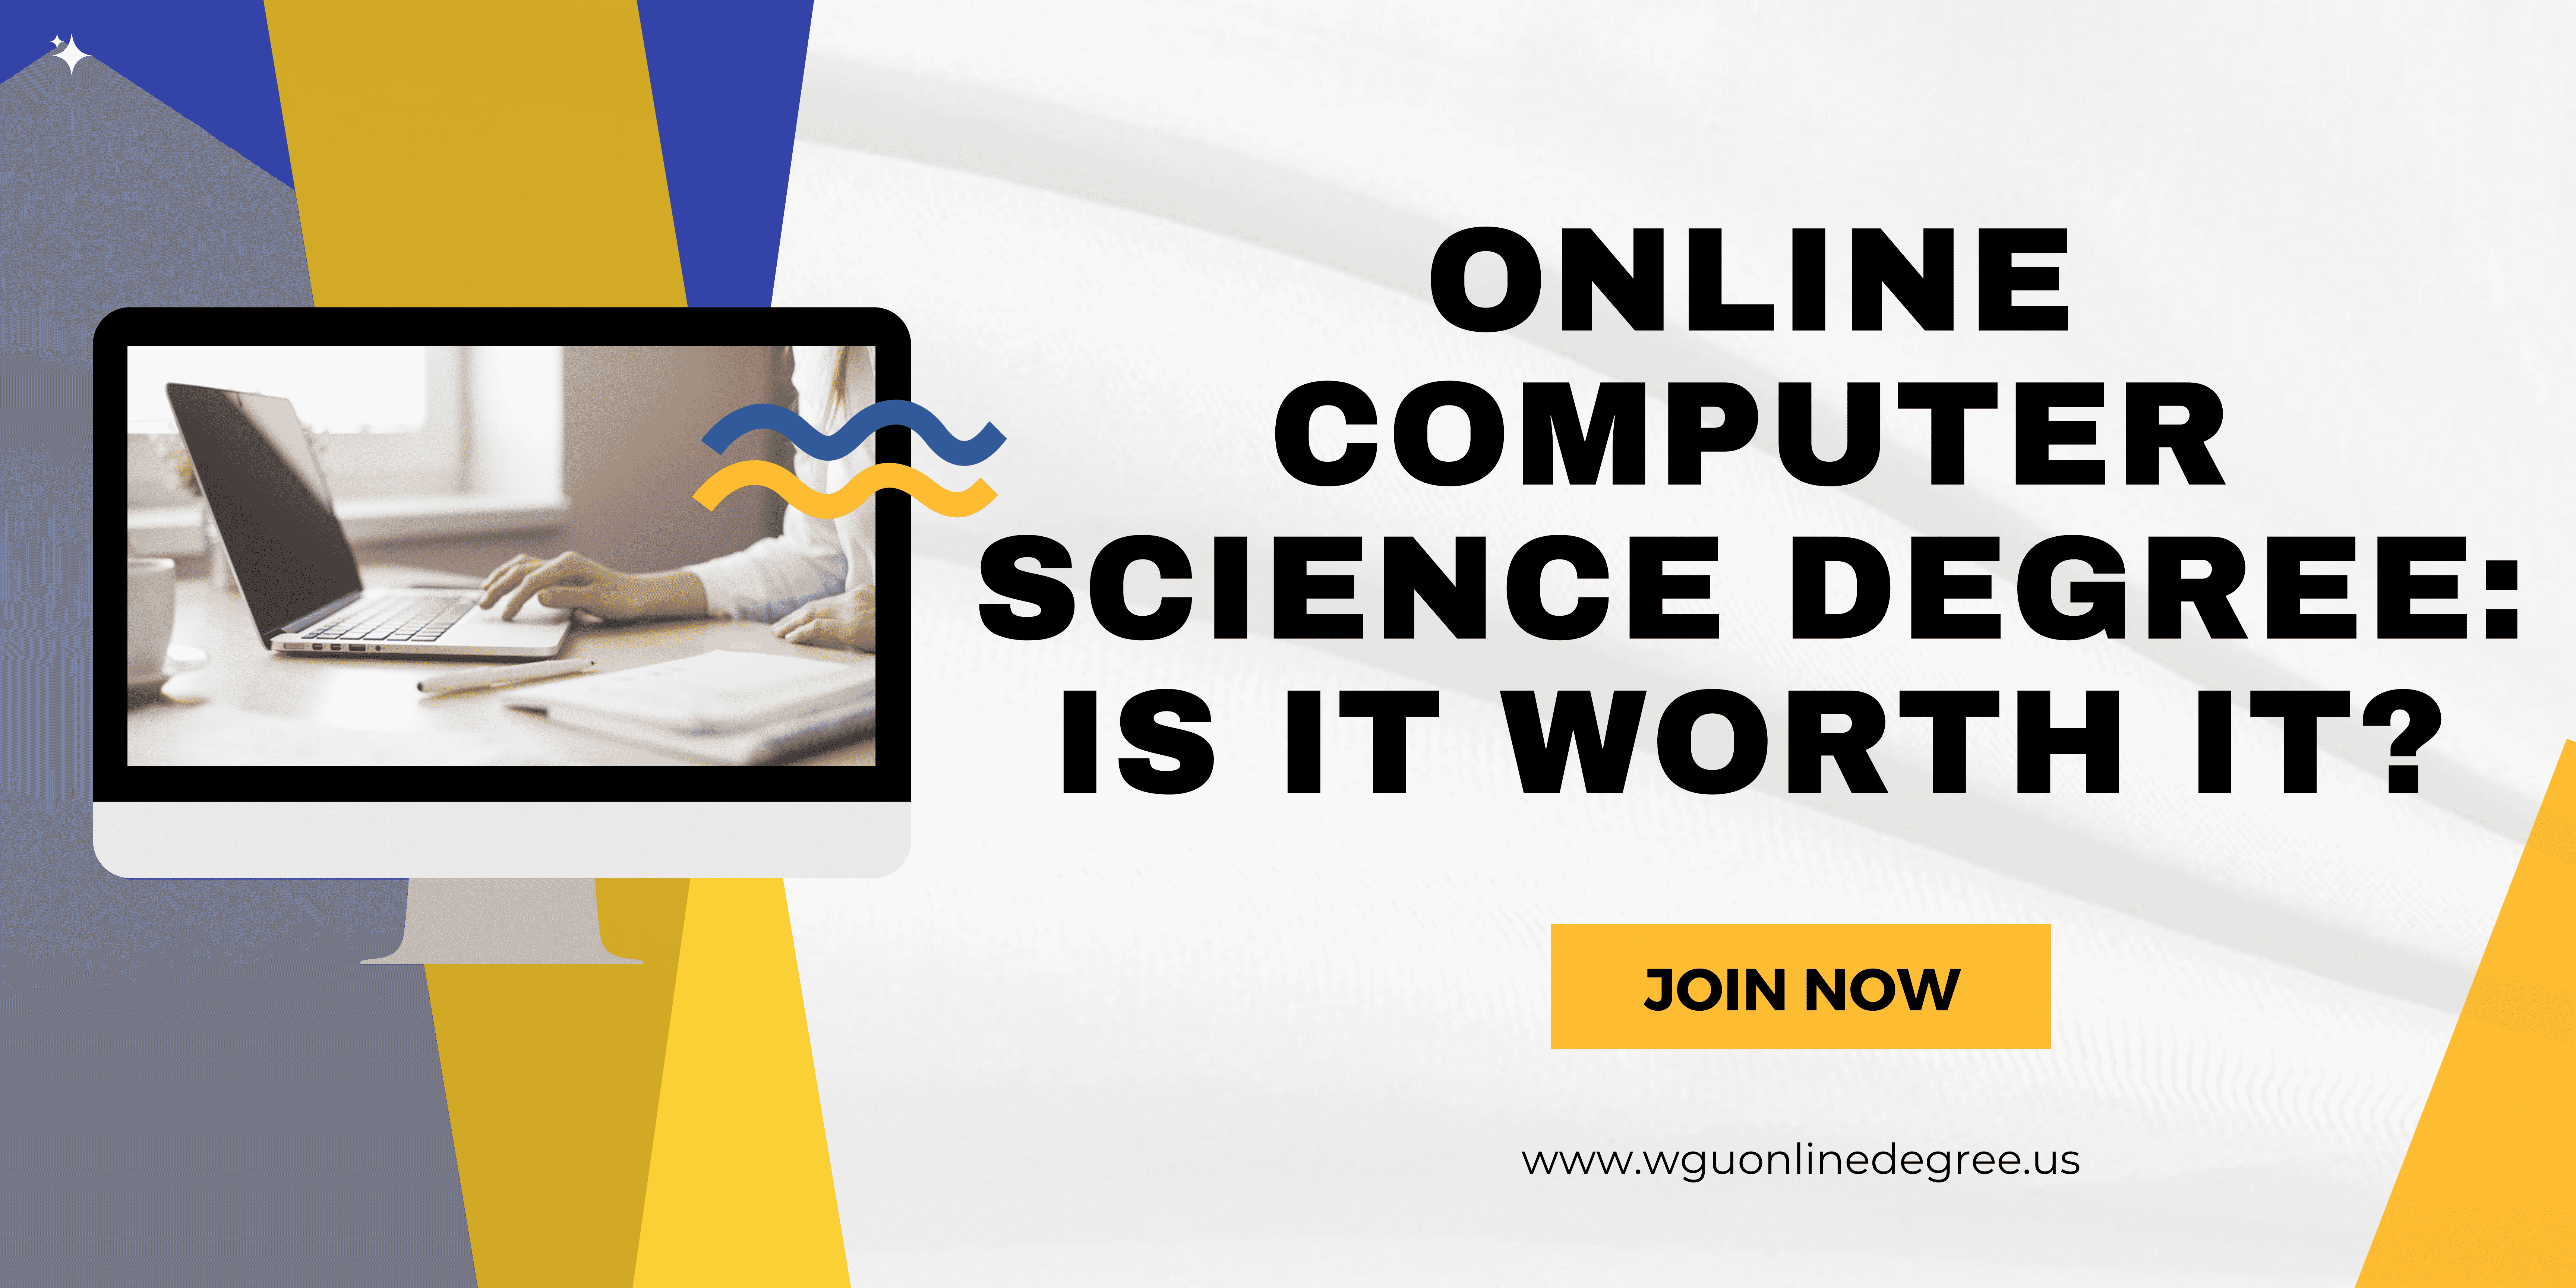 Online Computer Science Degree: Is It Worth It?